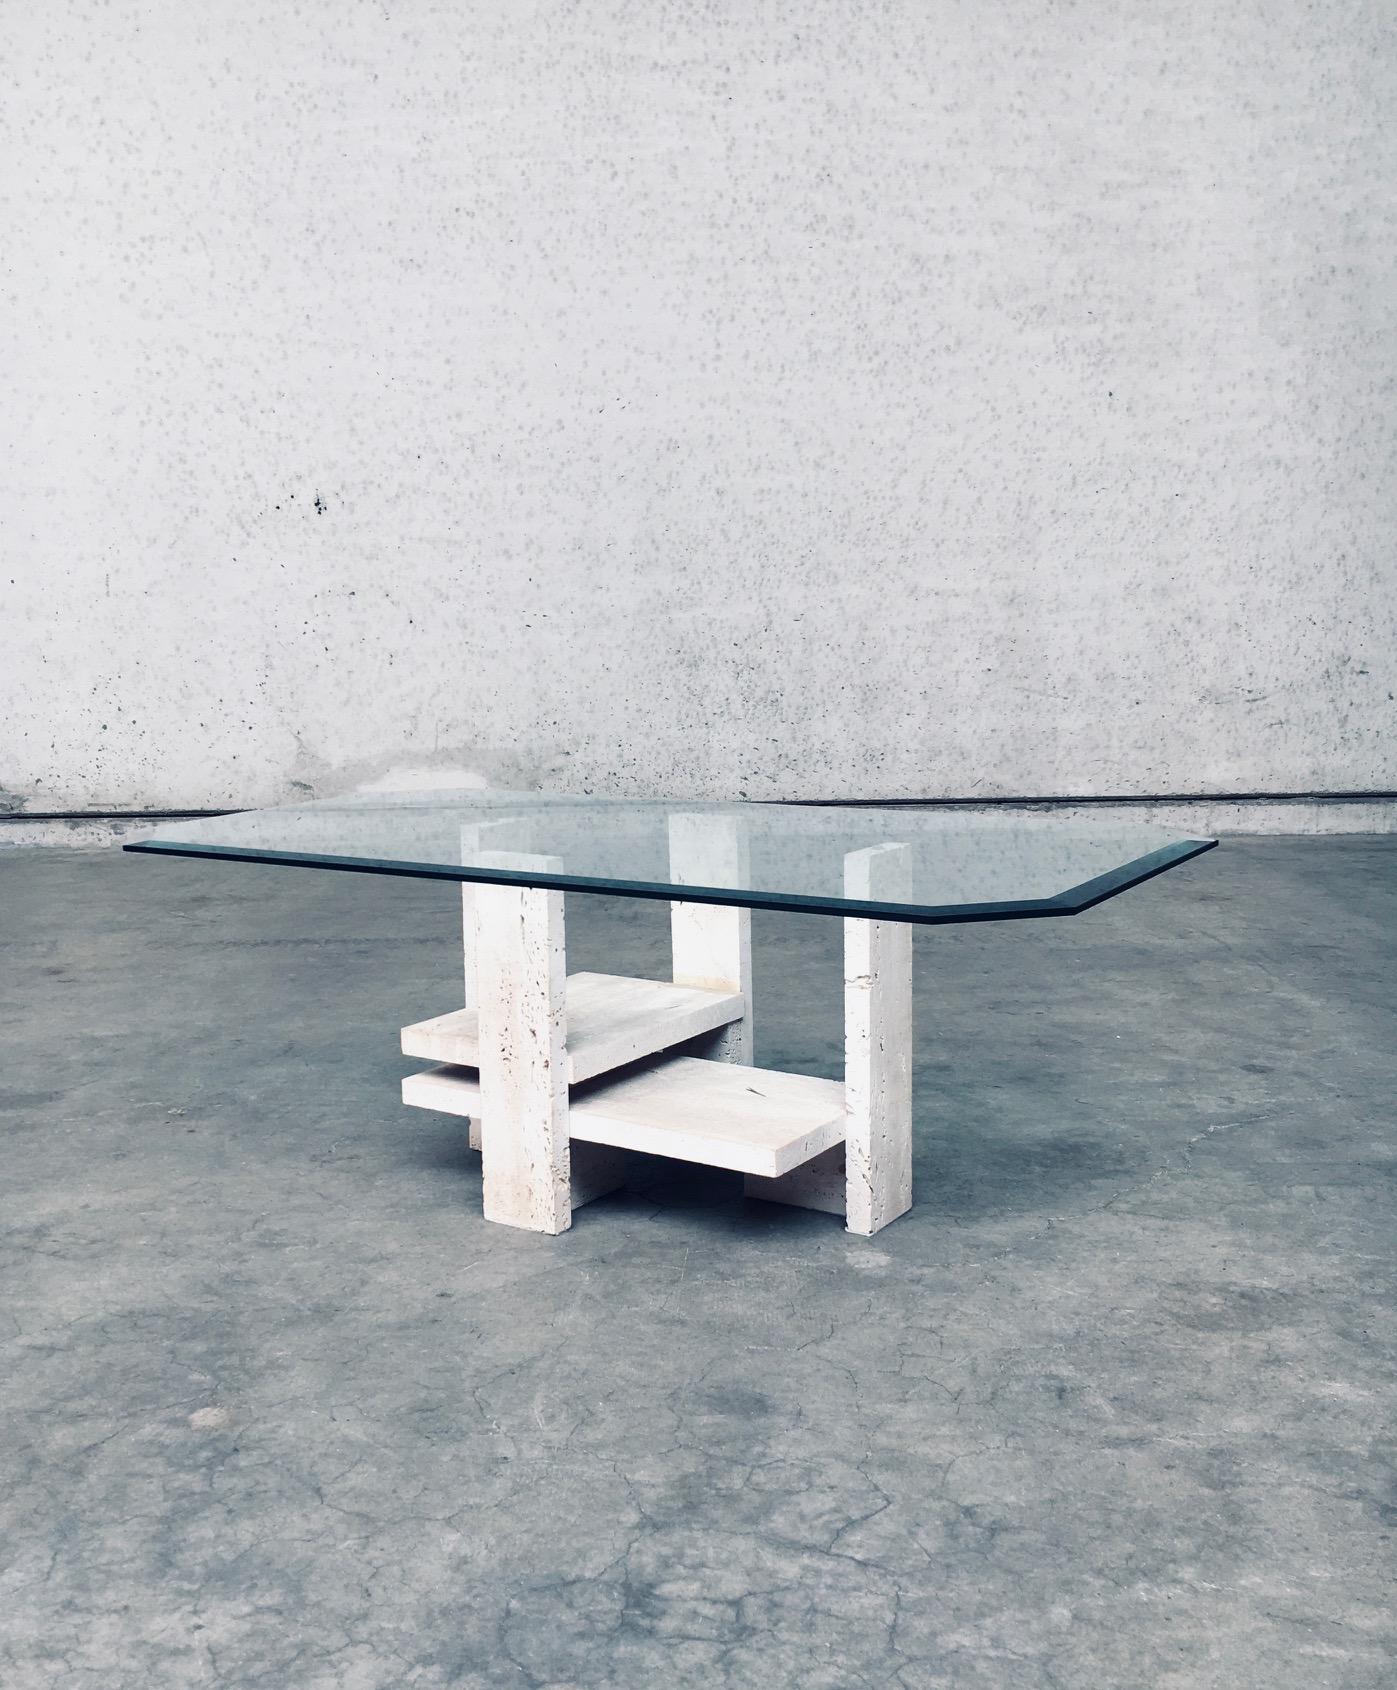 Brutalist Design Travertine Coffee Table by Willy Ballez, Belgium 1970's For Sale 11